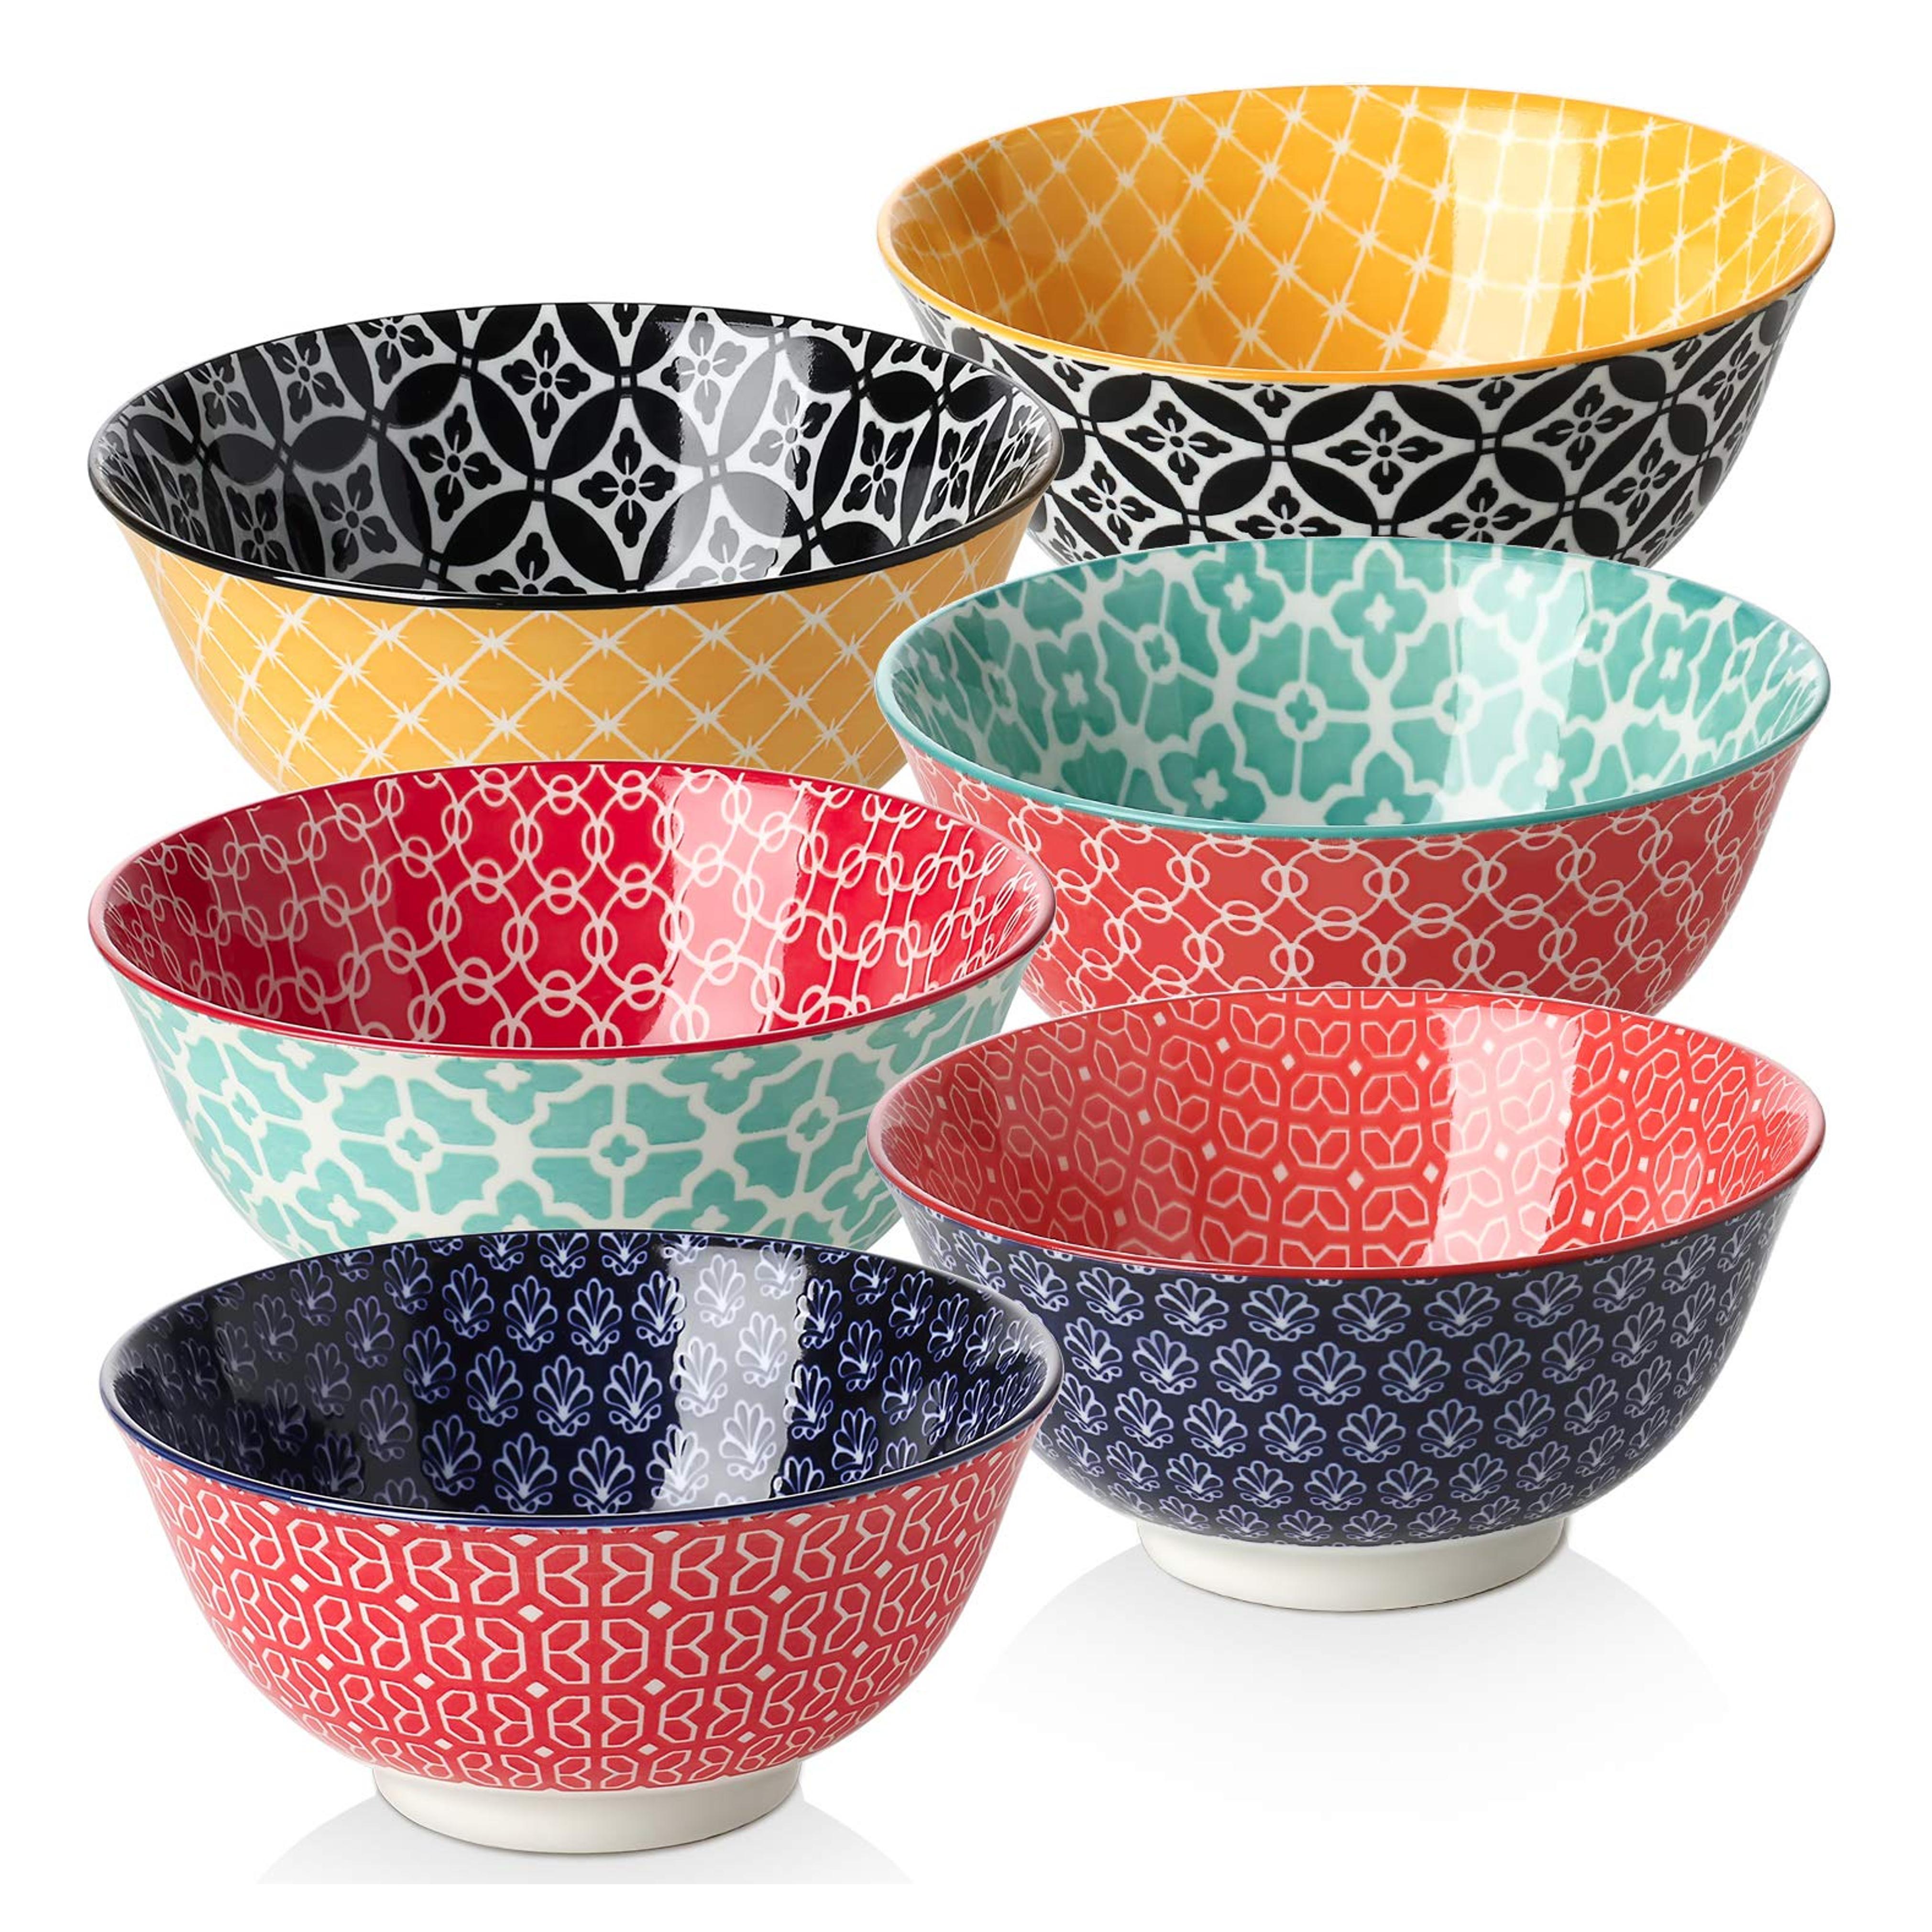 DOWAN Ceramic Cereal Bowls, 23 Oz Vibrant Color Bowls for Kitchen, Soup Bowl Set for Pasta, Salad, Ice Cream and Oatmeal, Set of 6